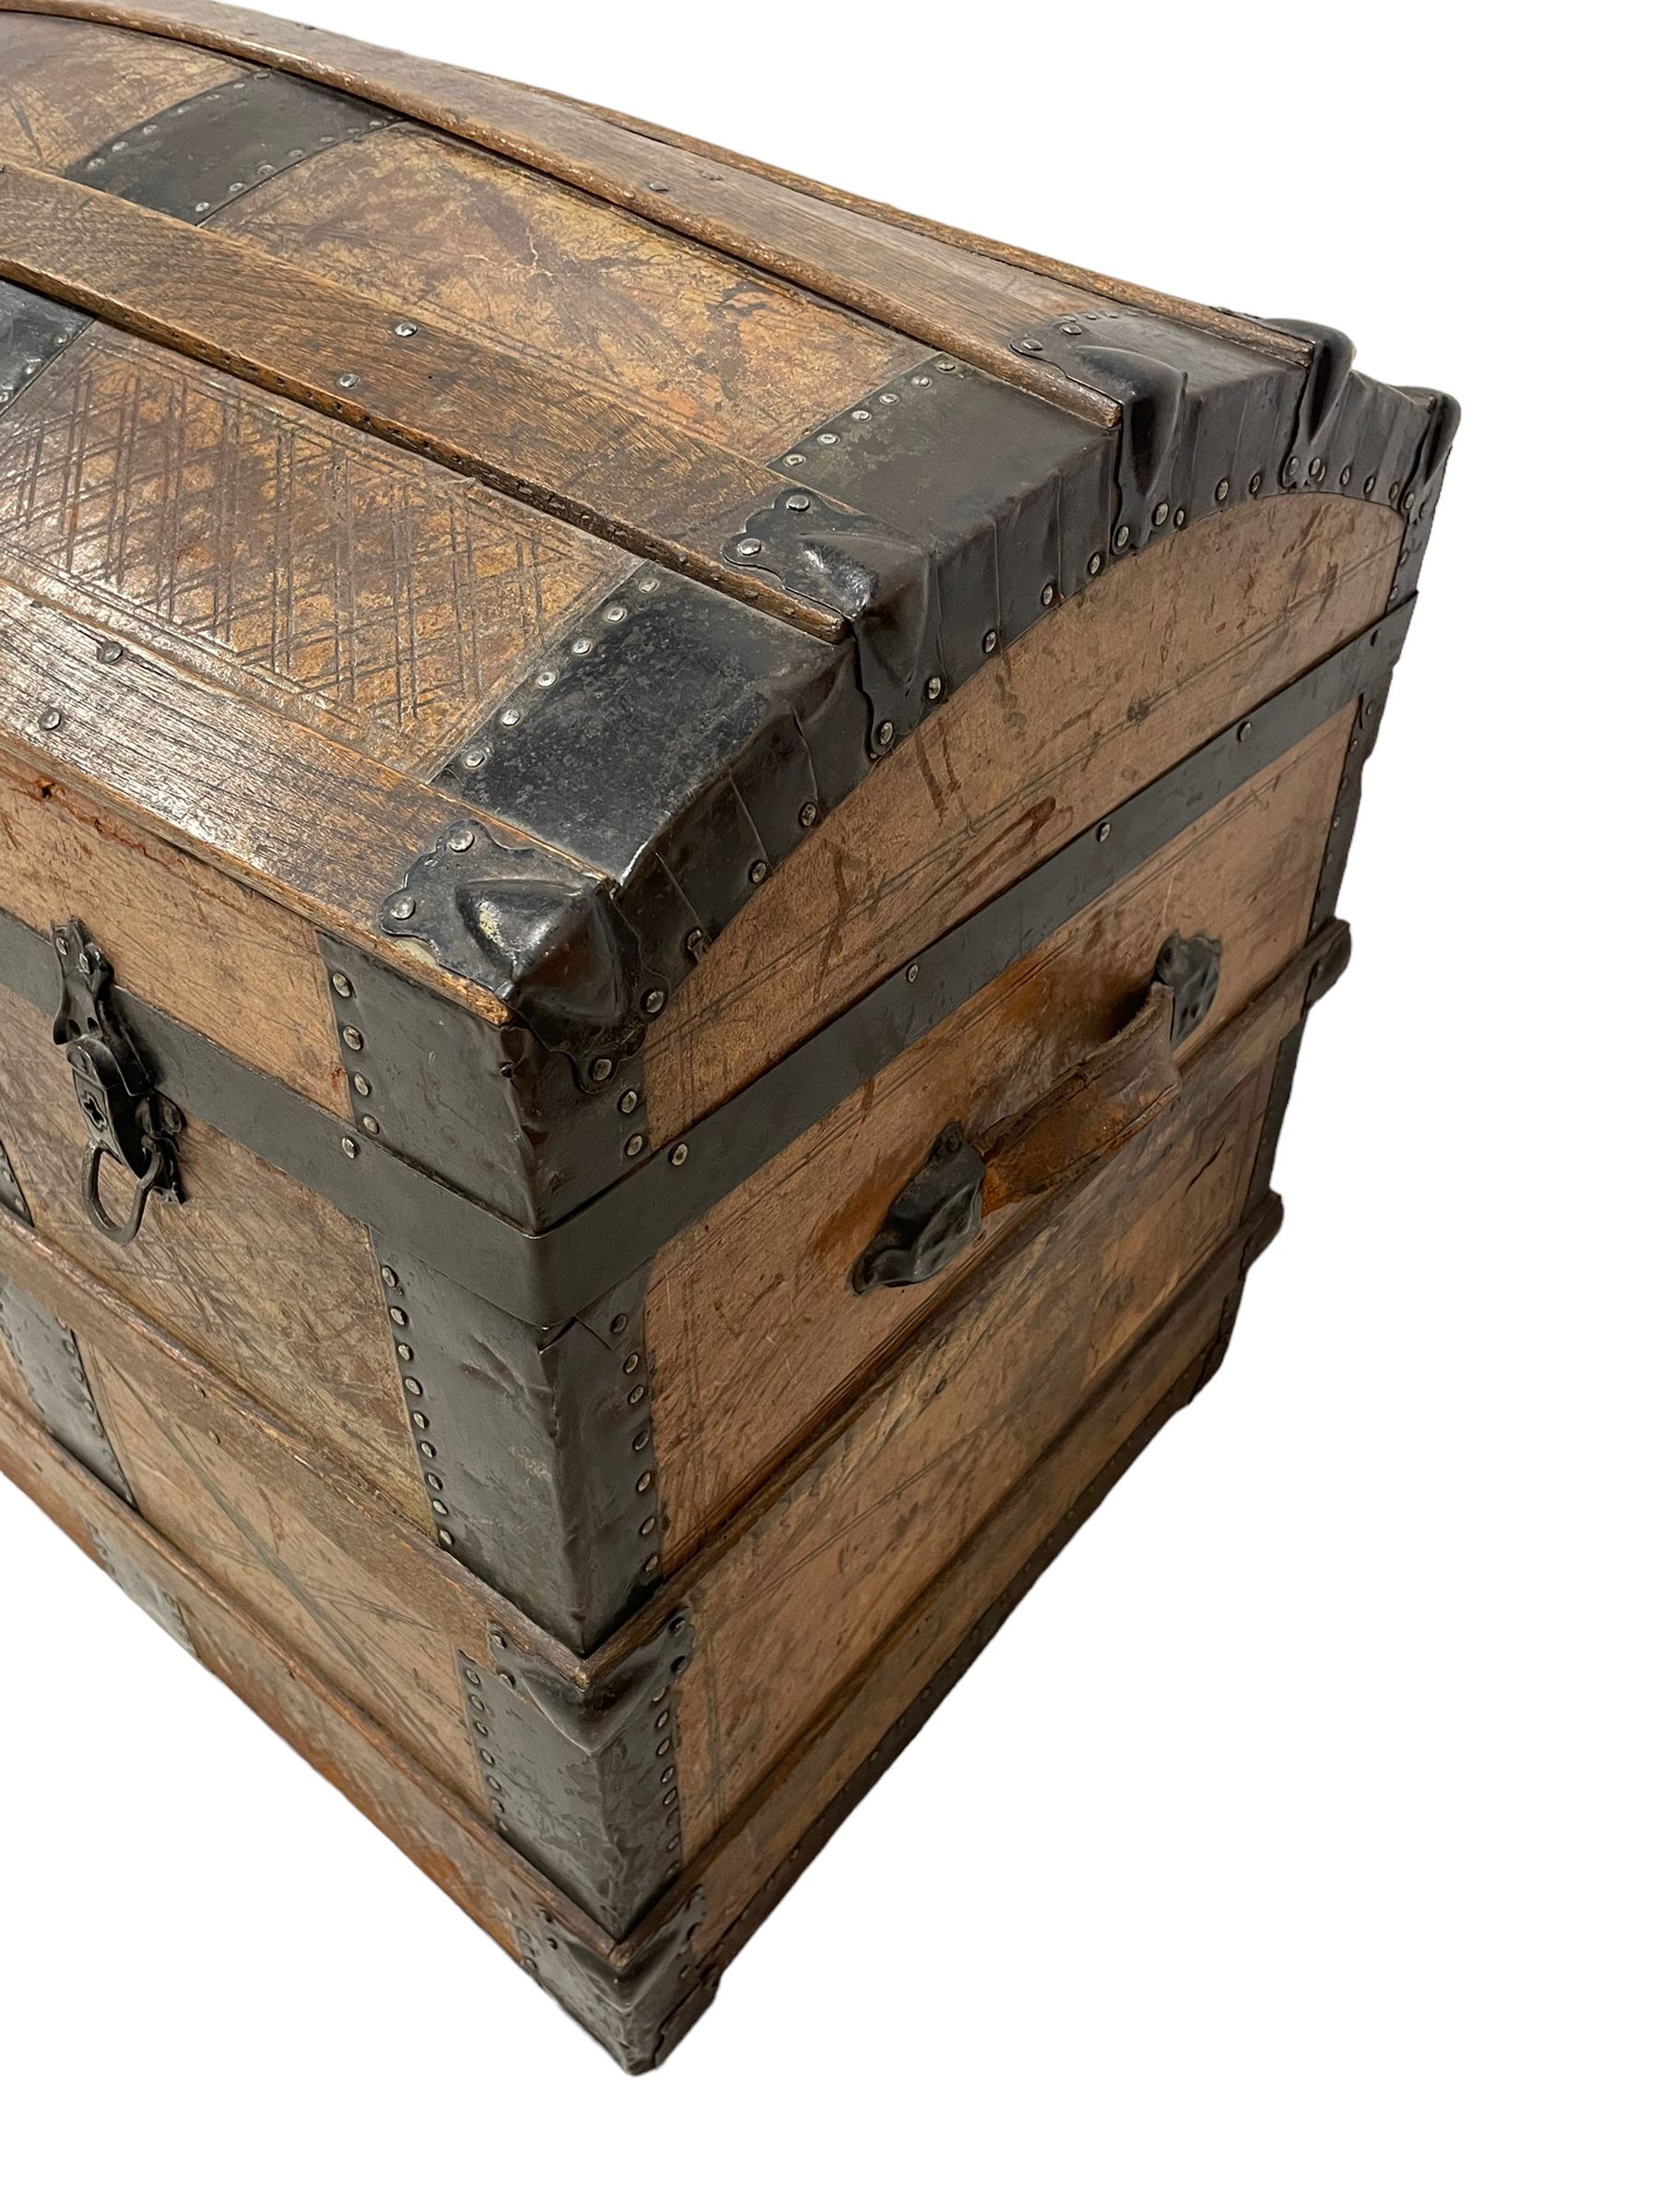 Victorian leather bound travelling trunk - Image 3 of 8